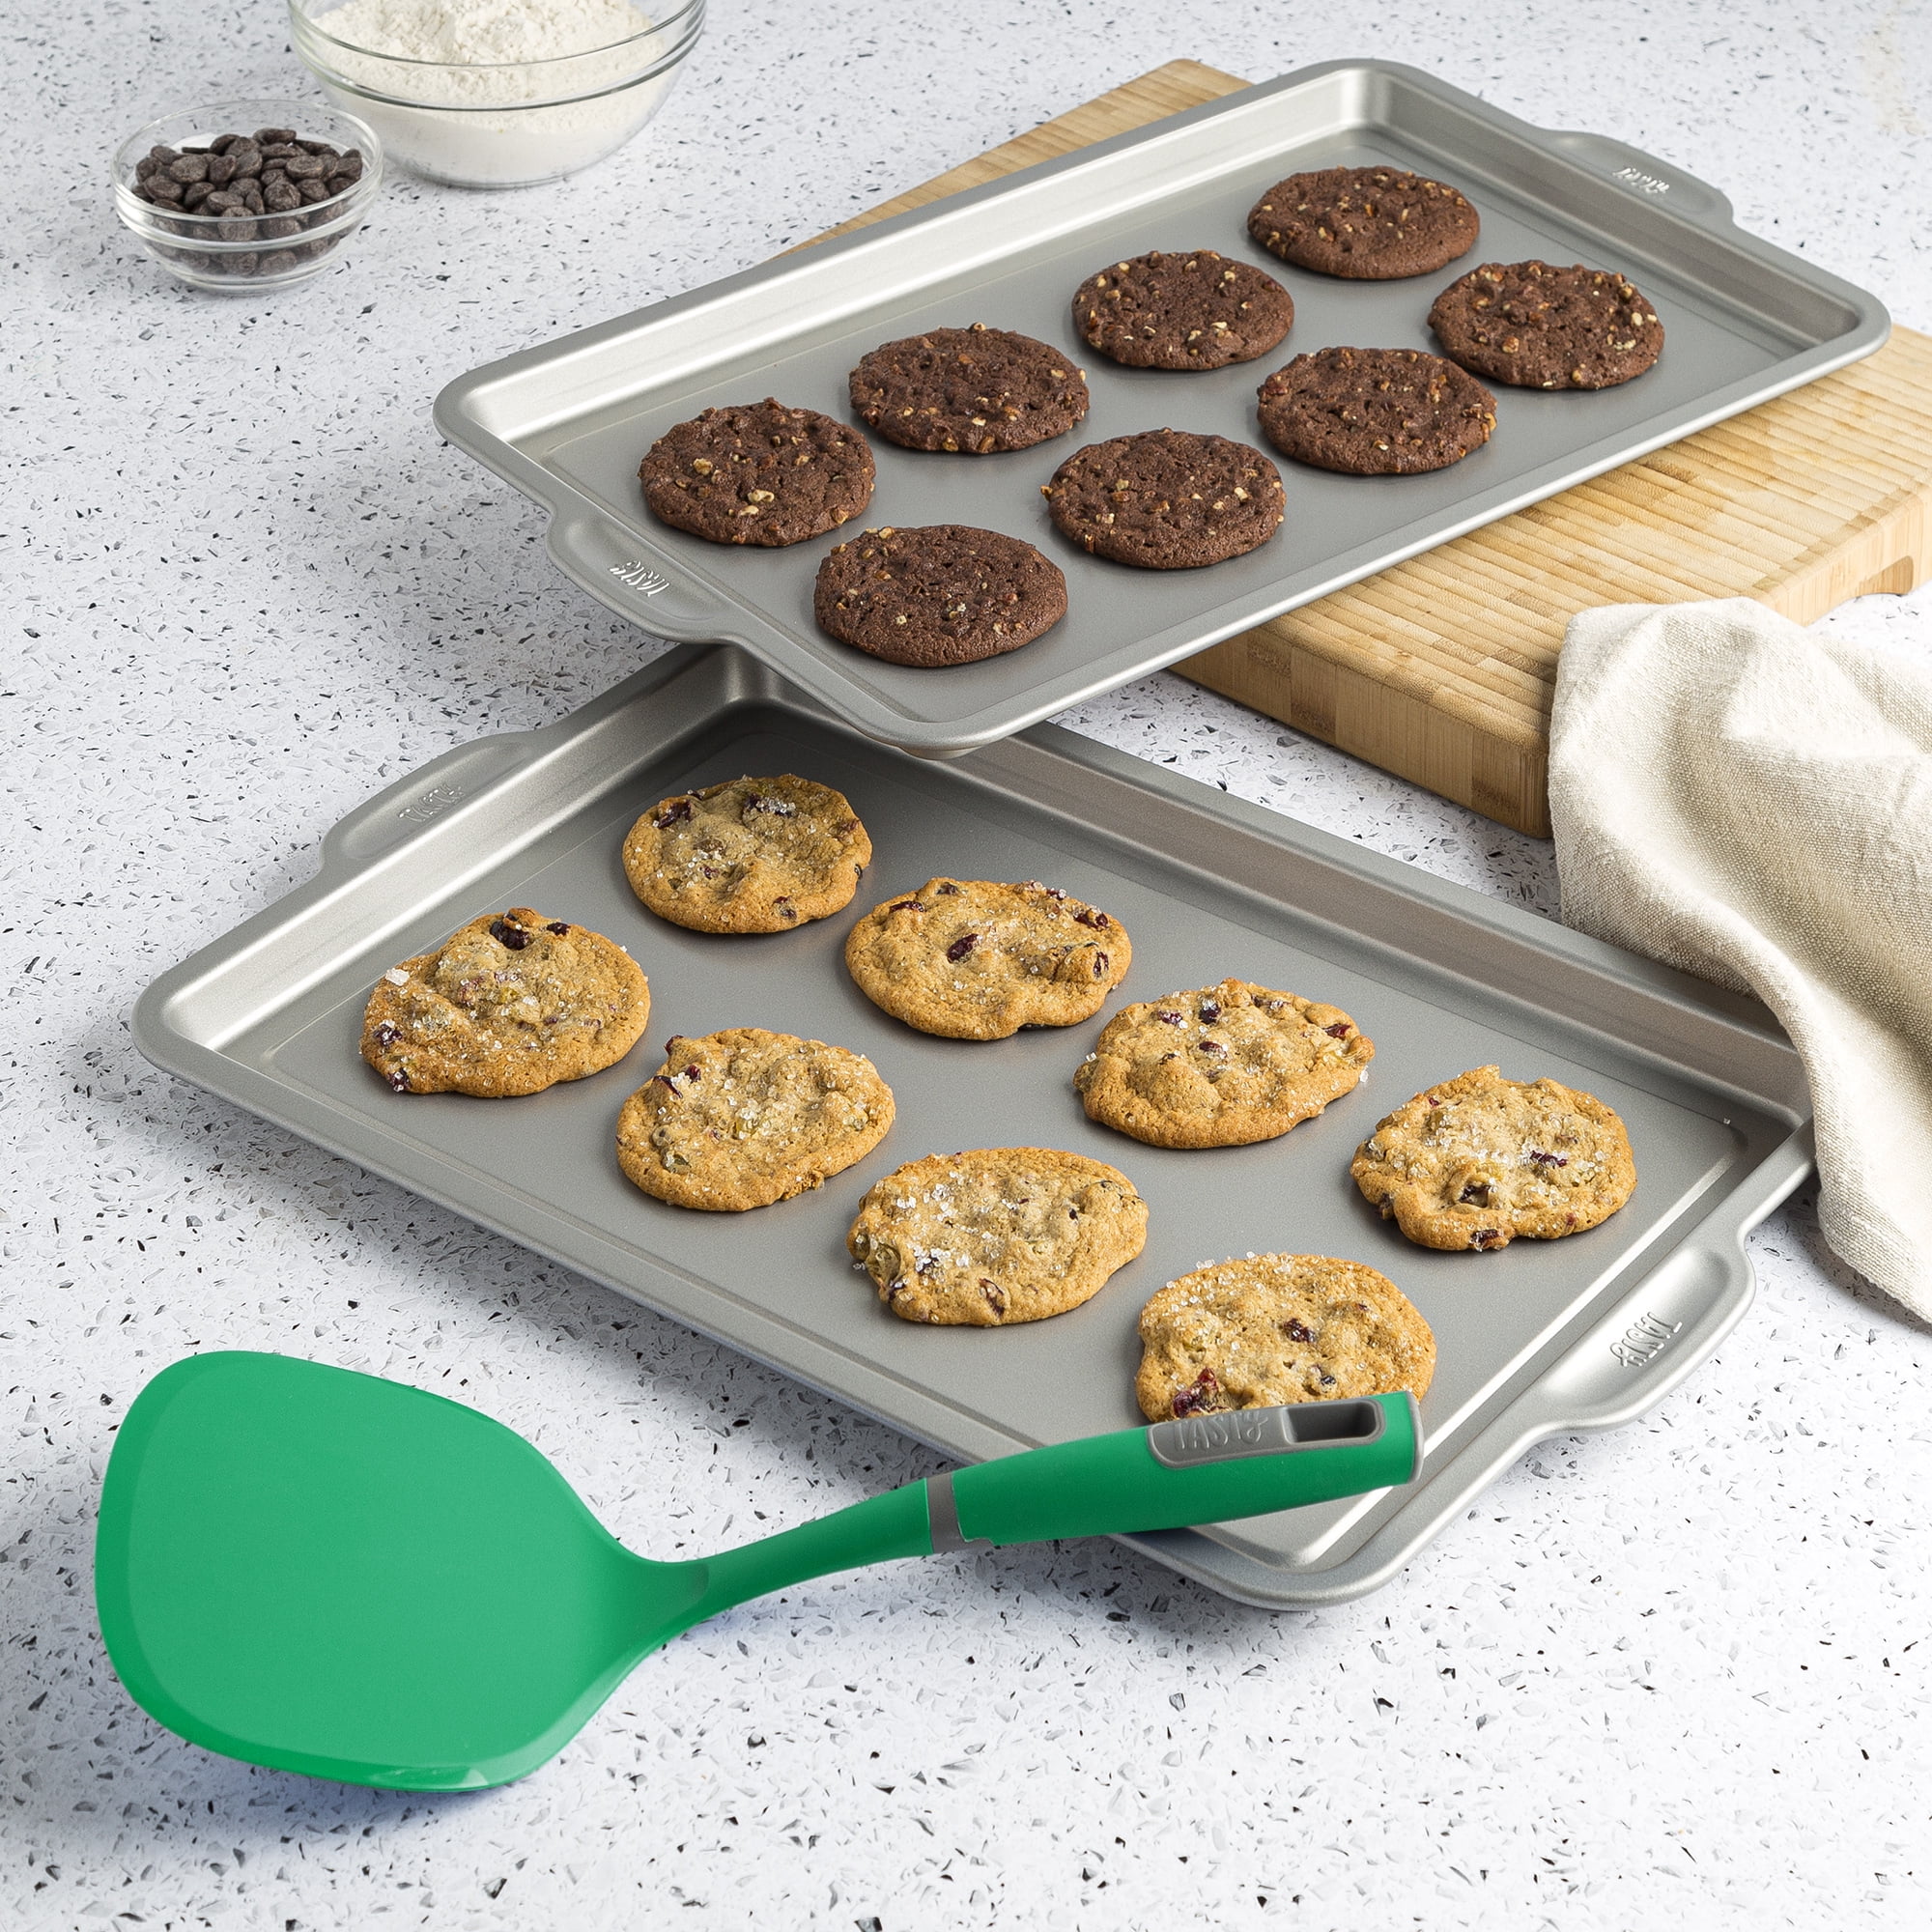 Baker's Secret Nonstick Cookie Sheet 15, Carbon Steel Medium Size Cookie  Tray with Premium Food-Grade Coating, Non-stick Cookie Sheet, Bakeware  Baking Accessories - Classic Collection